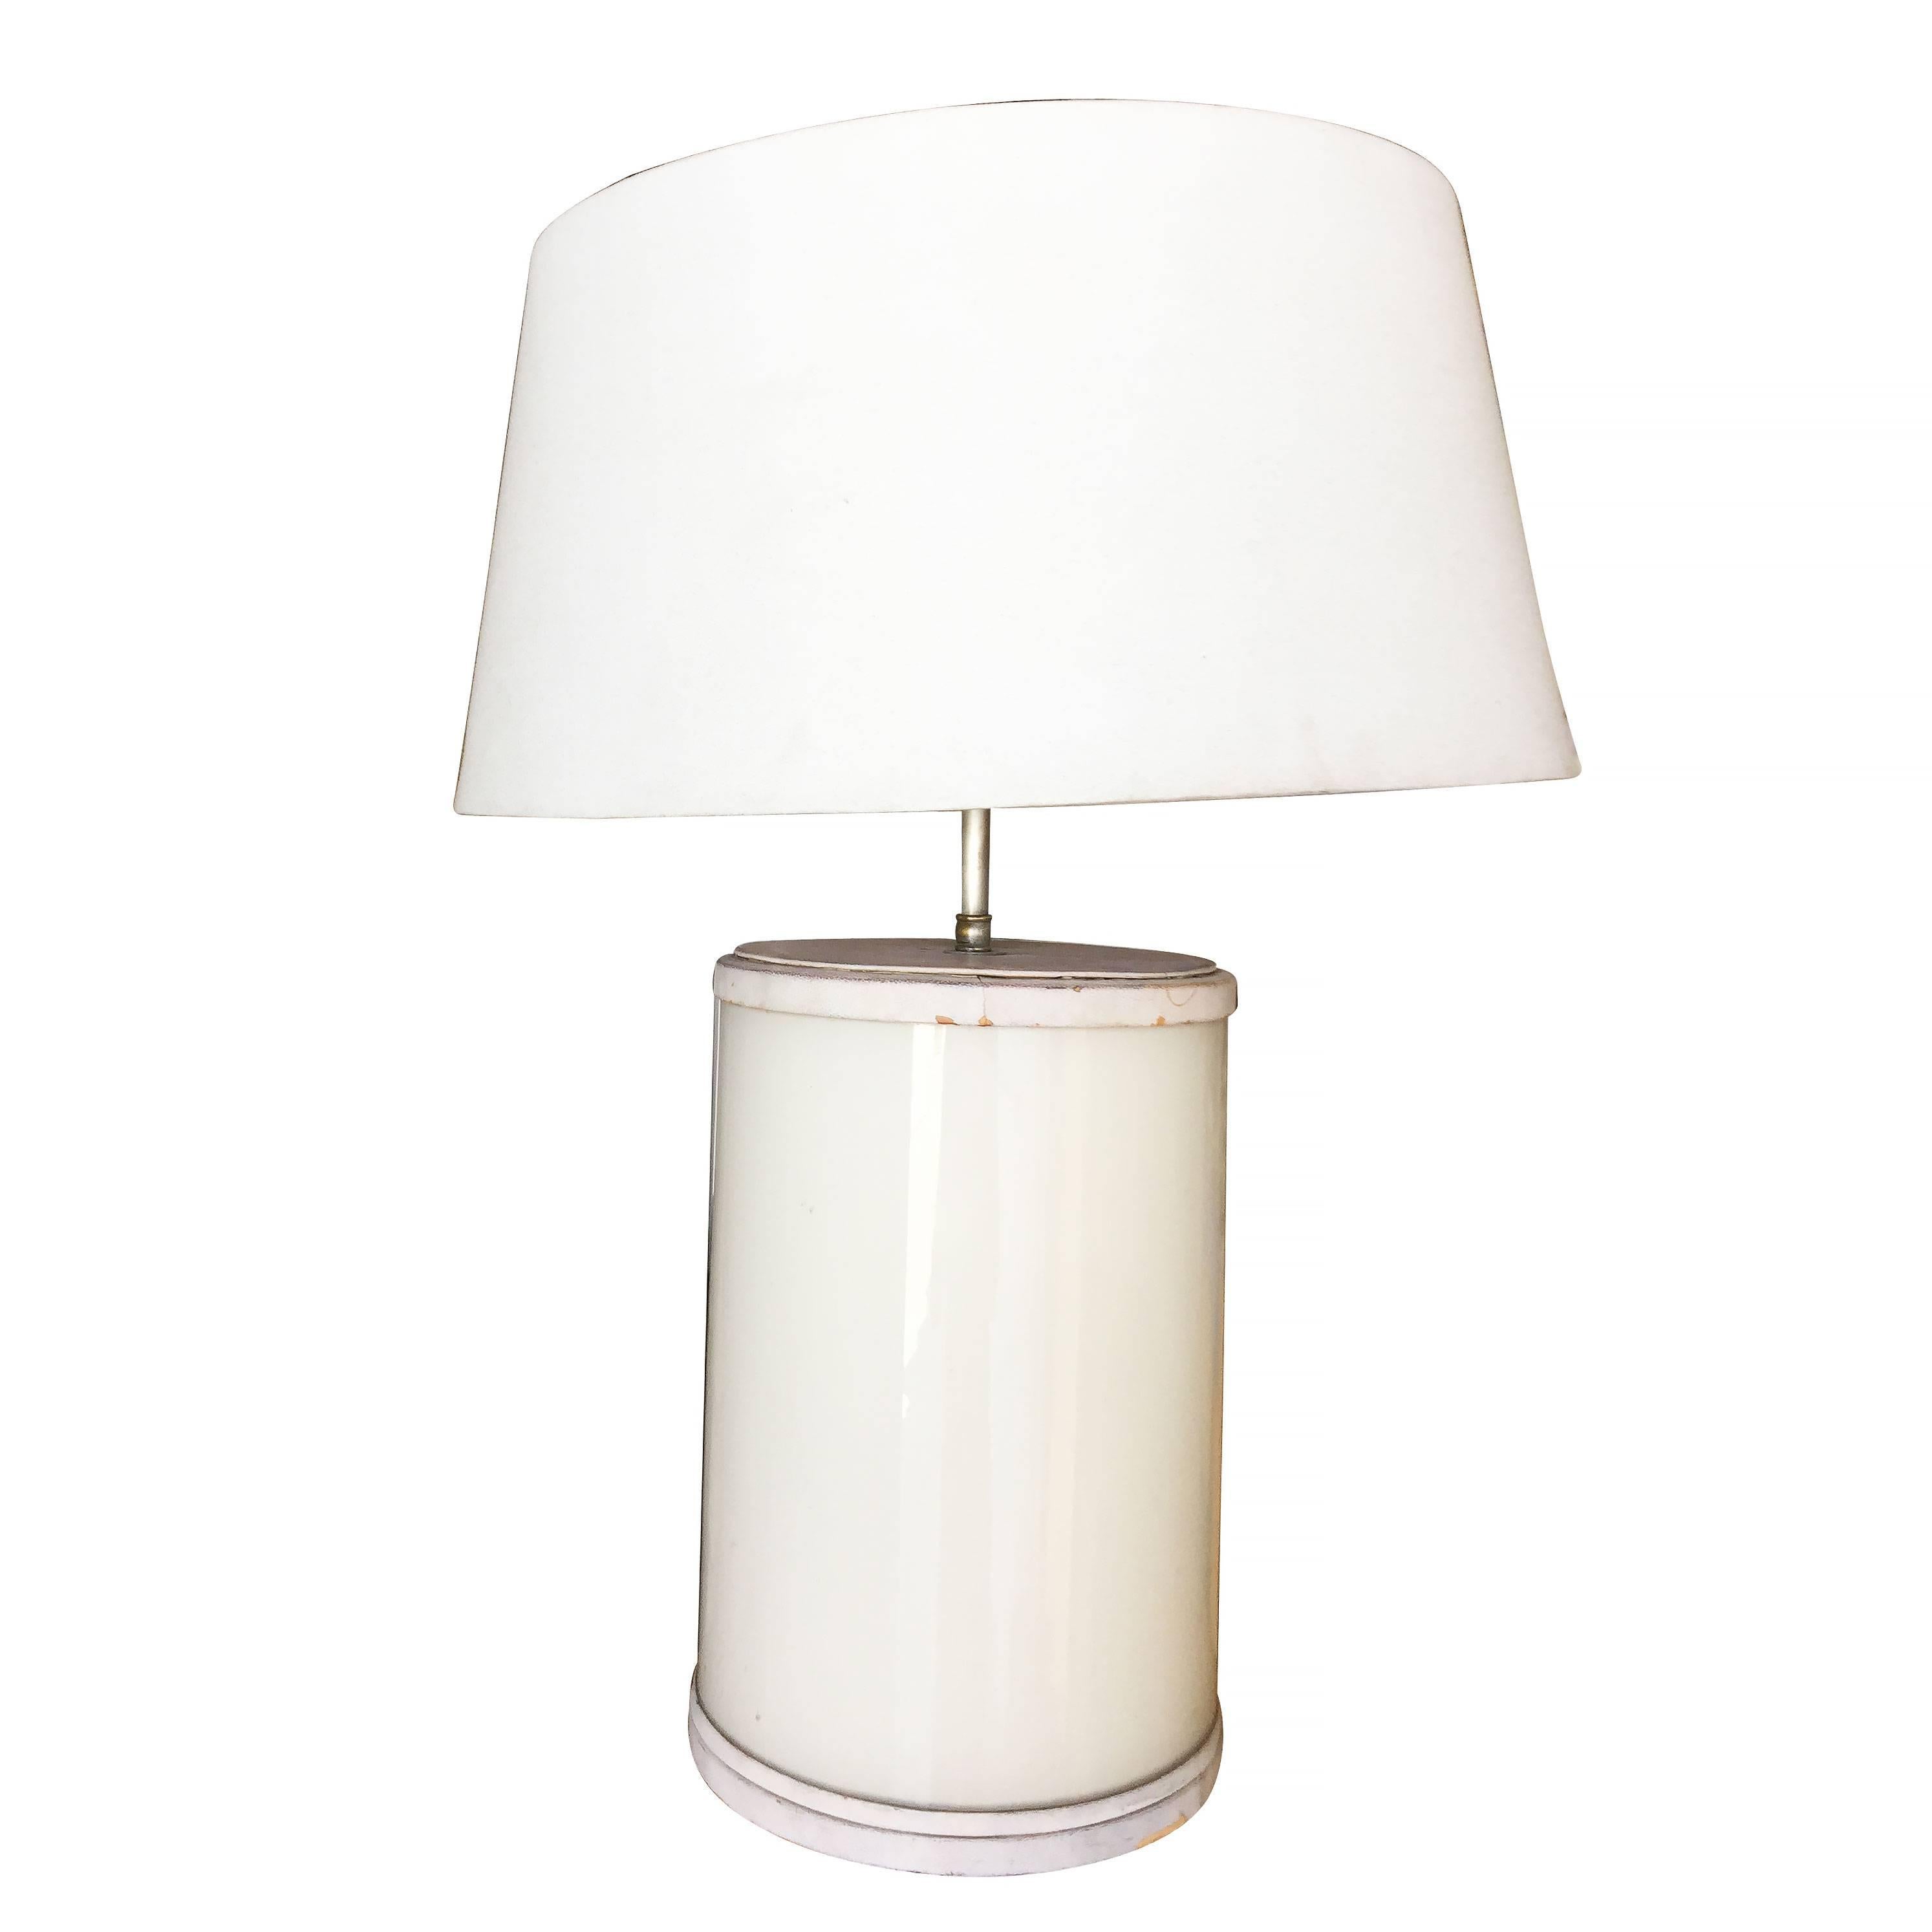 Paul Frankl custom white glass lamp with top and bottom pressed leather cap. 

Lamp- 26